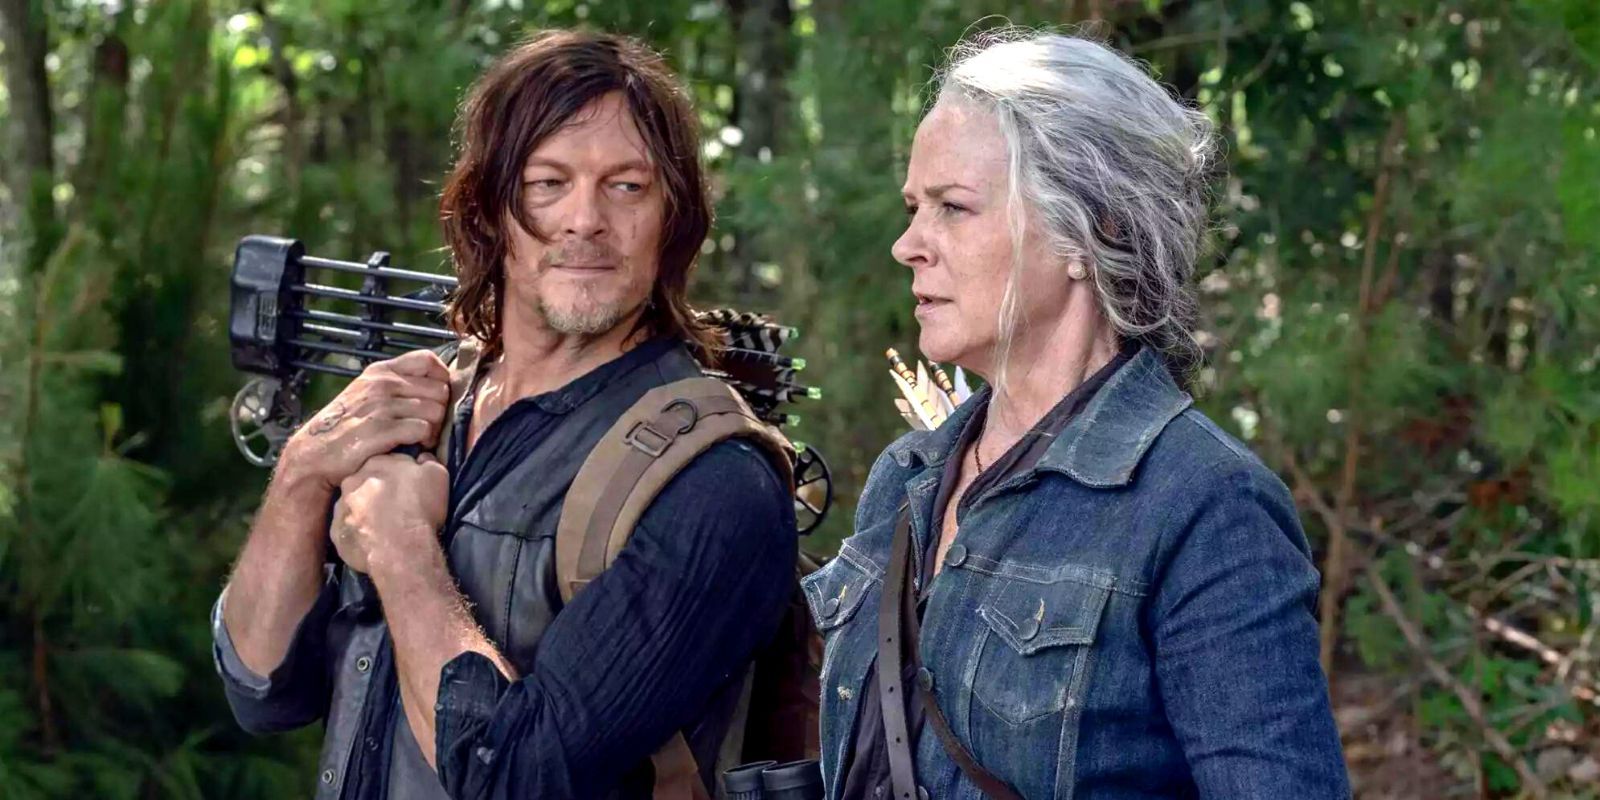 Daryl and Carol standing in a forest in The Walking Dead